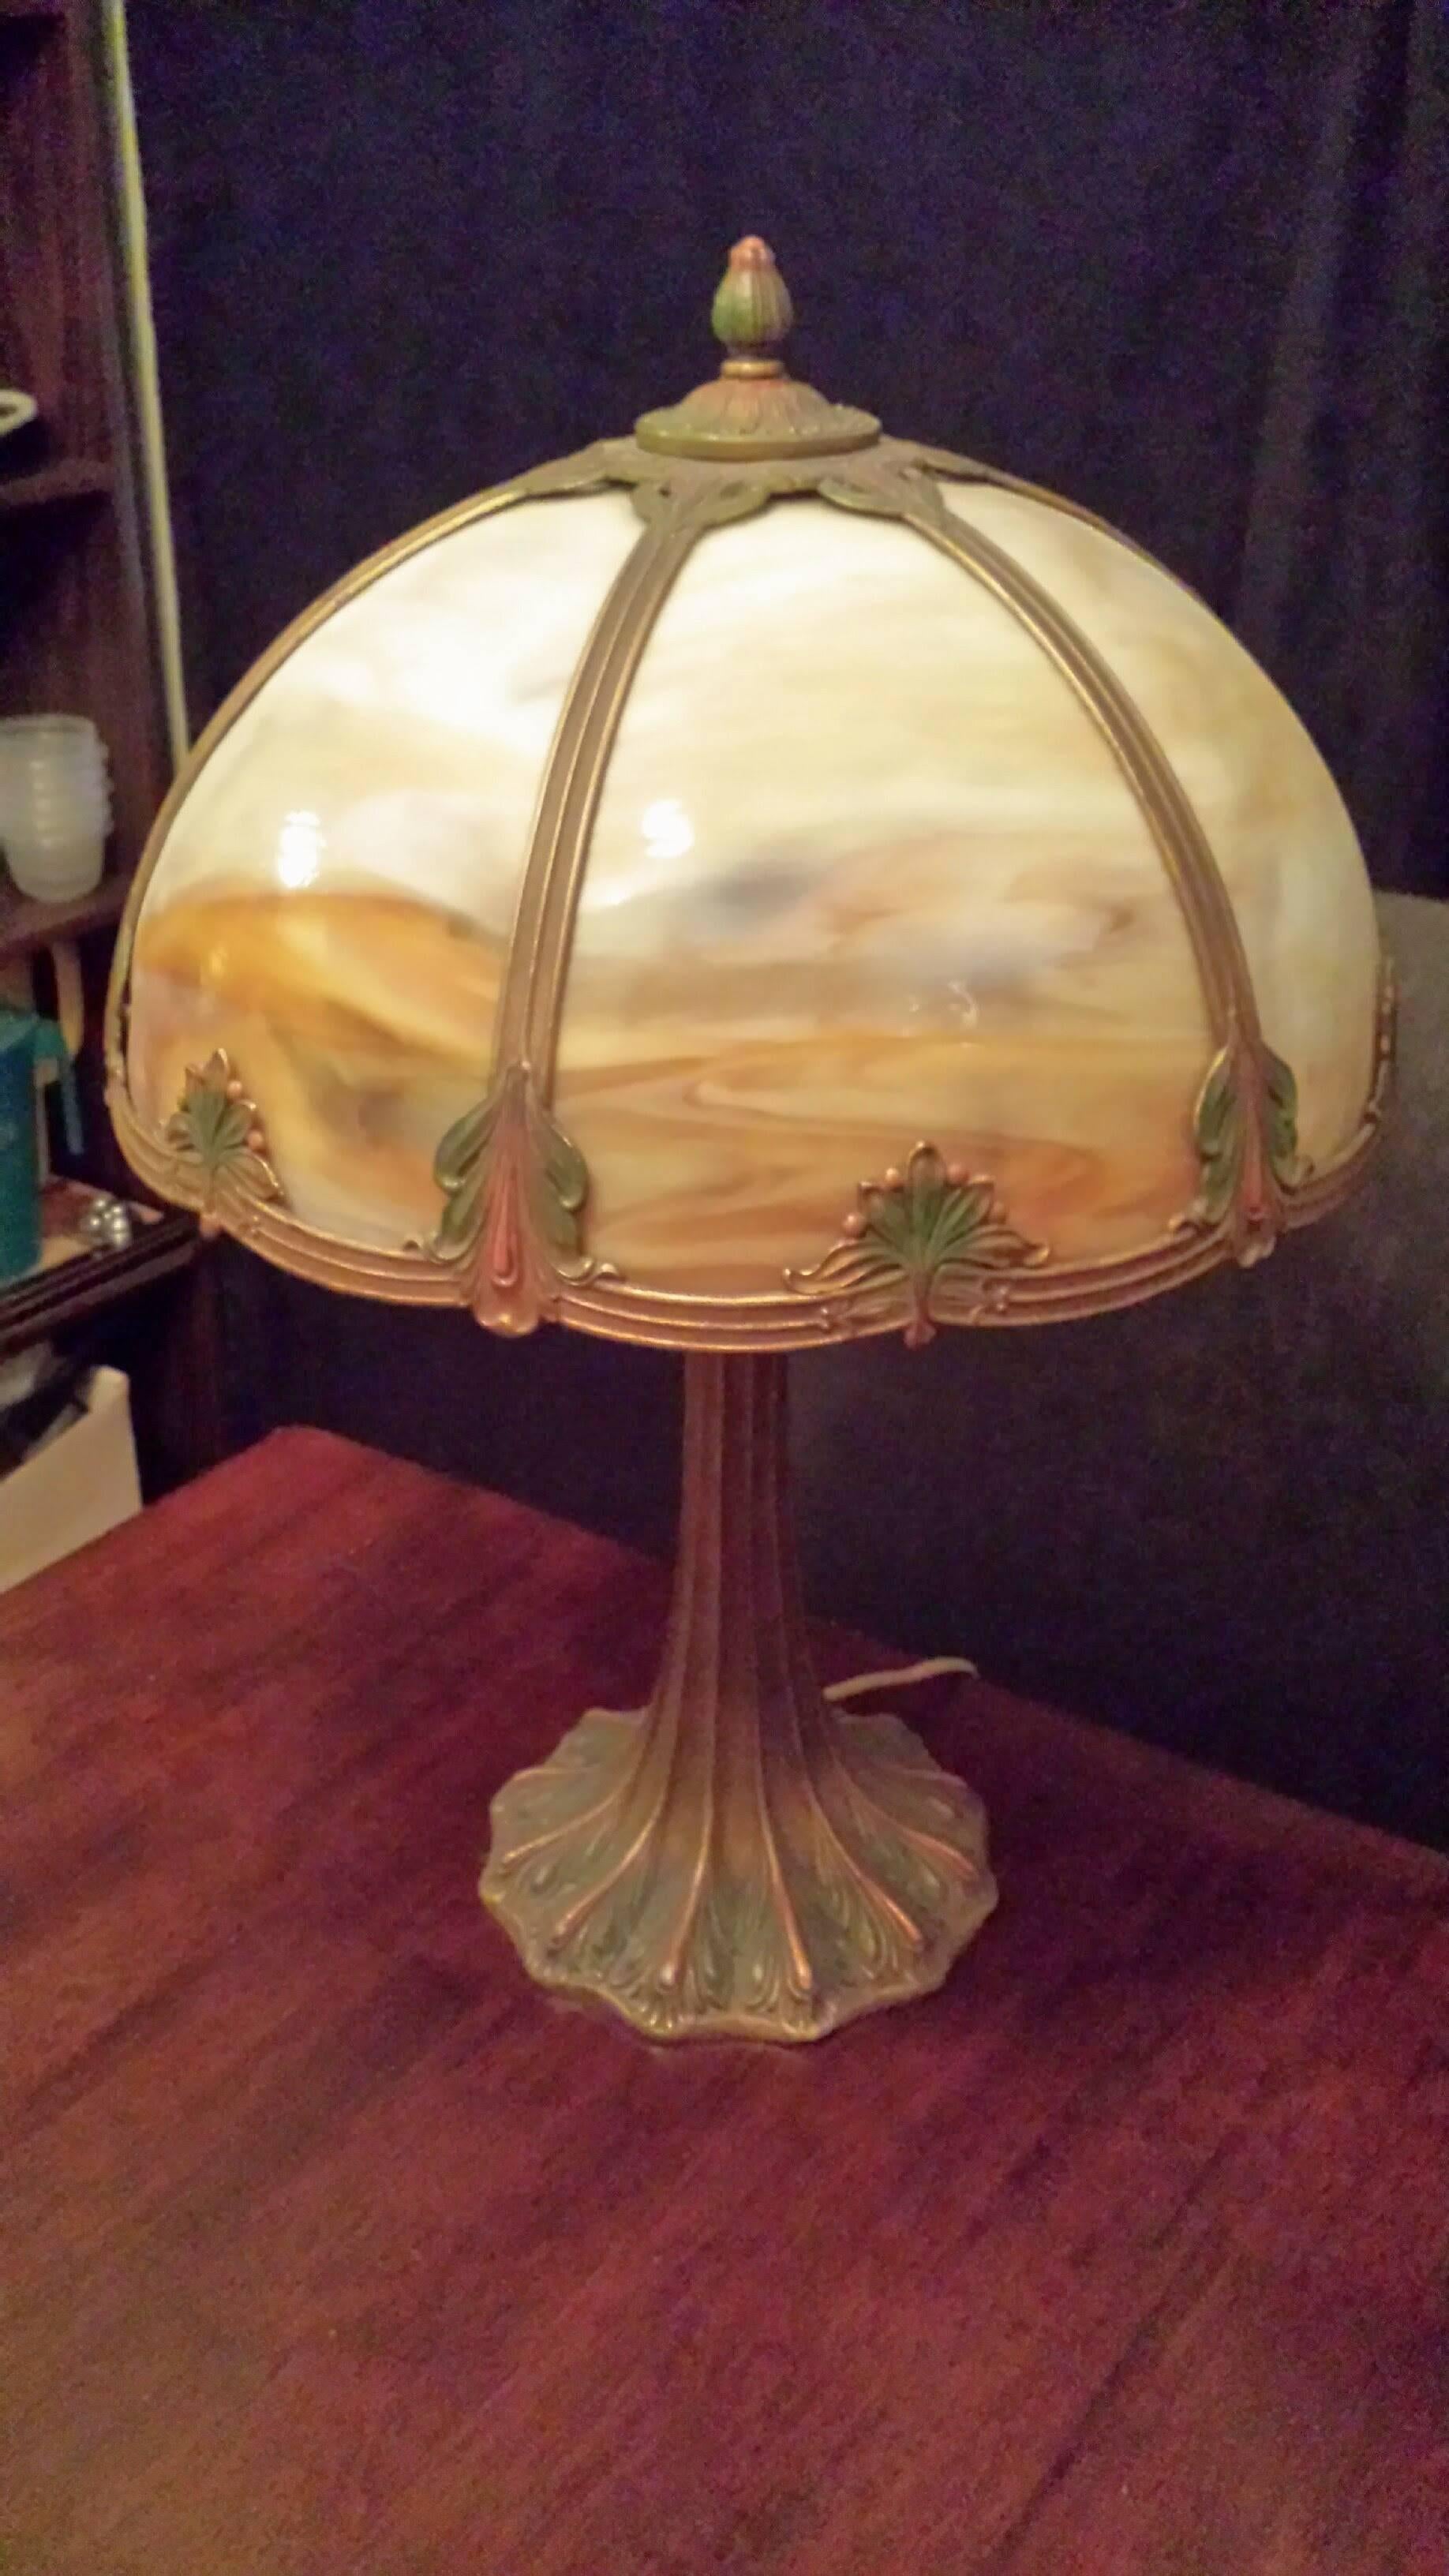 Edwardian Slag Glass Table Lamp, Carmel Colored Glass with a Decorated Shade and Base